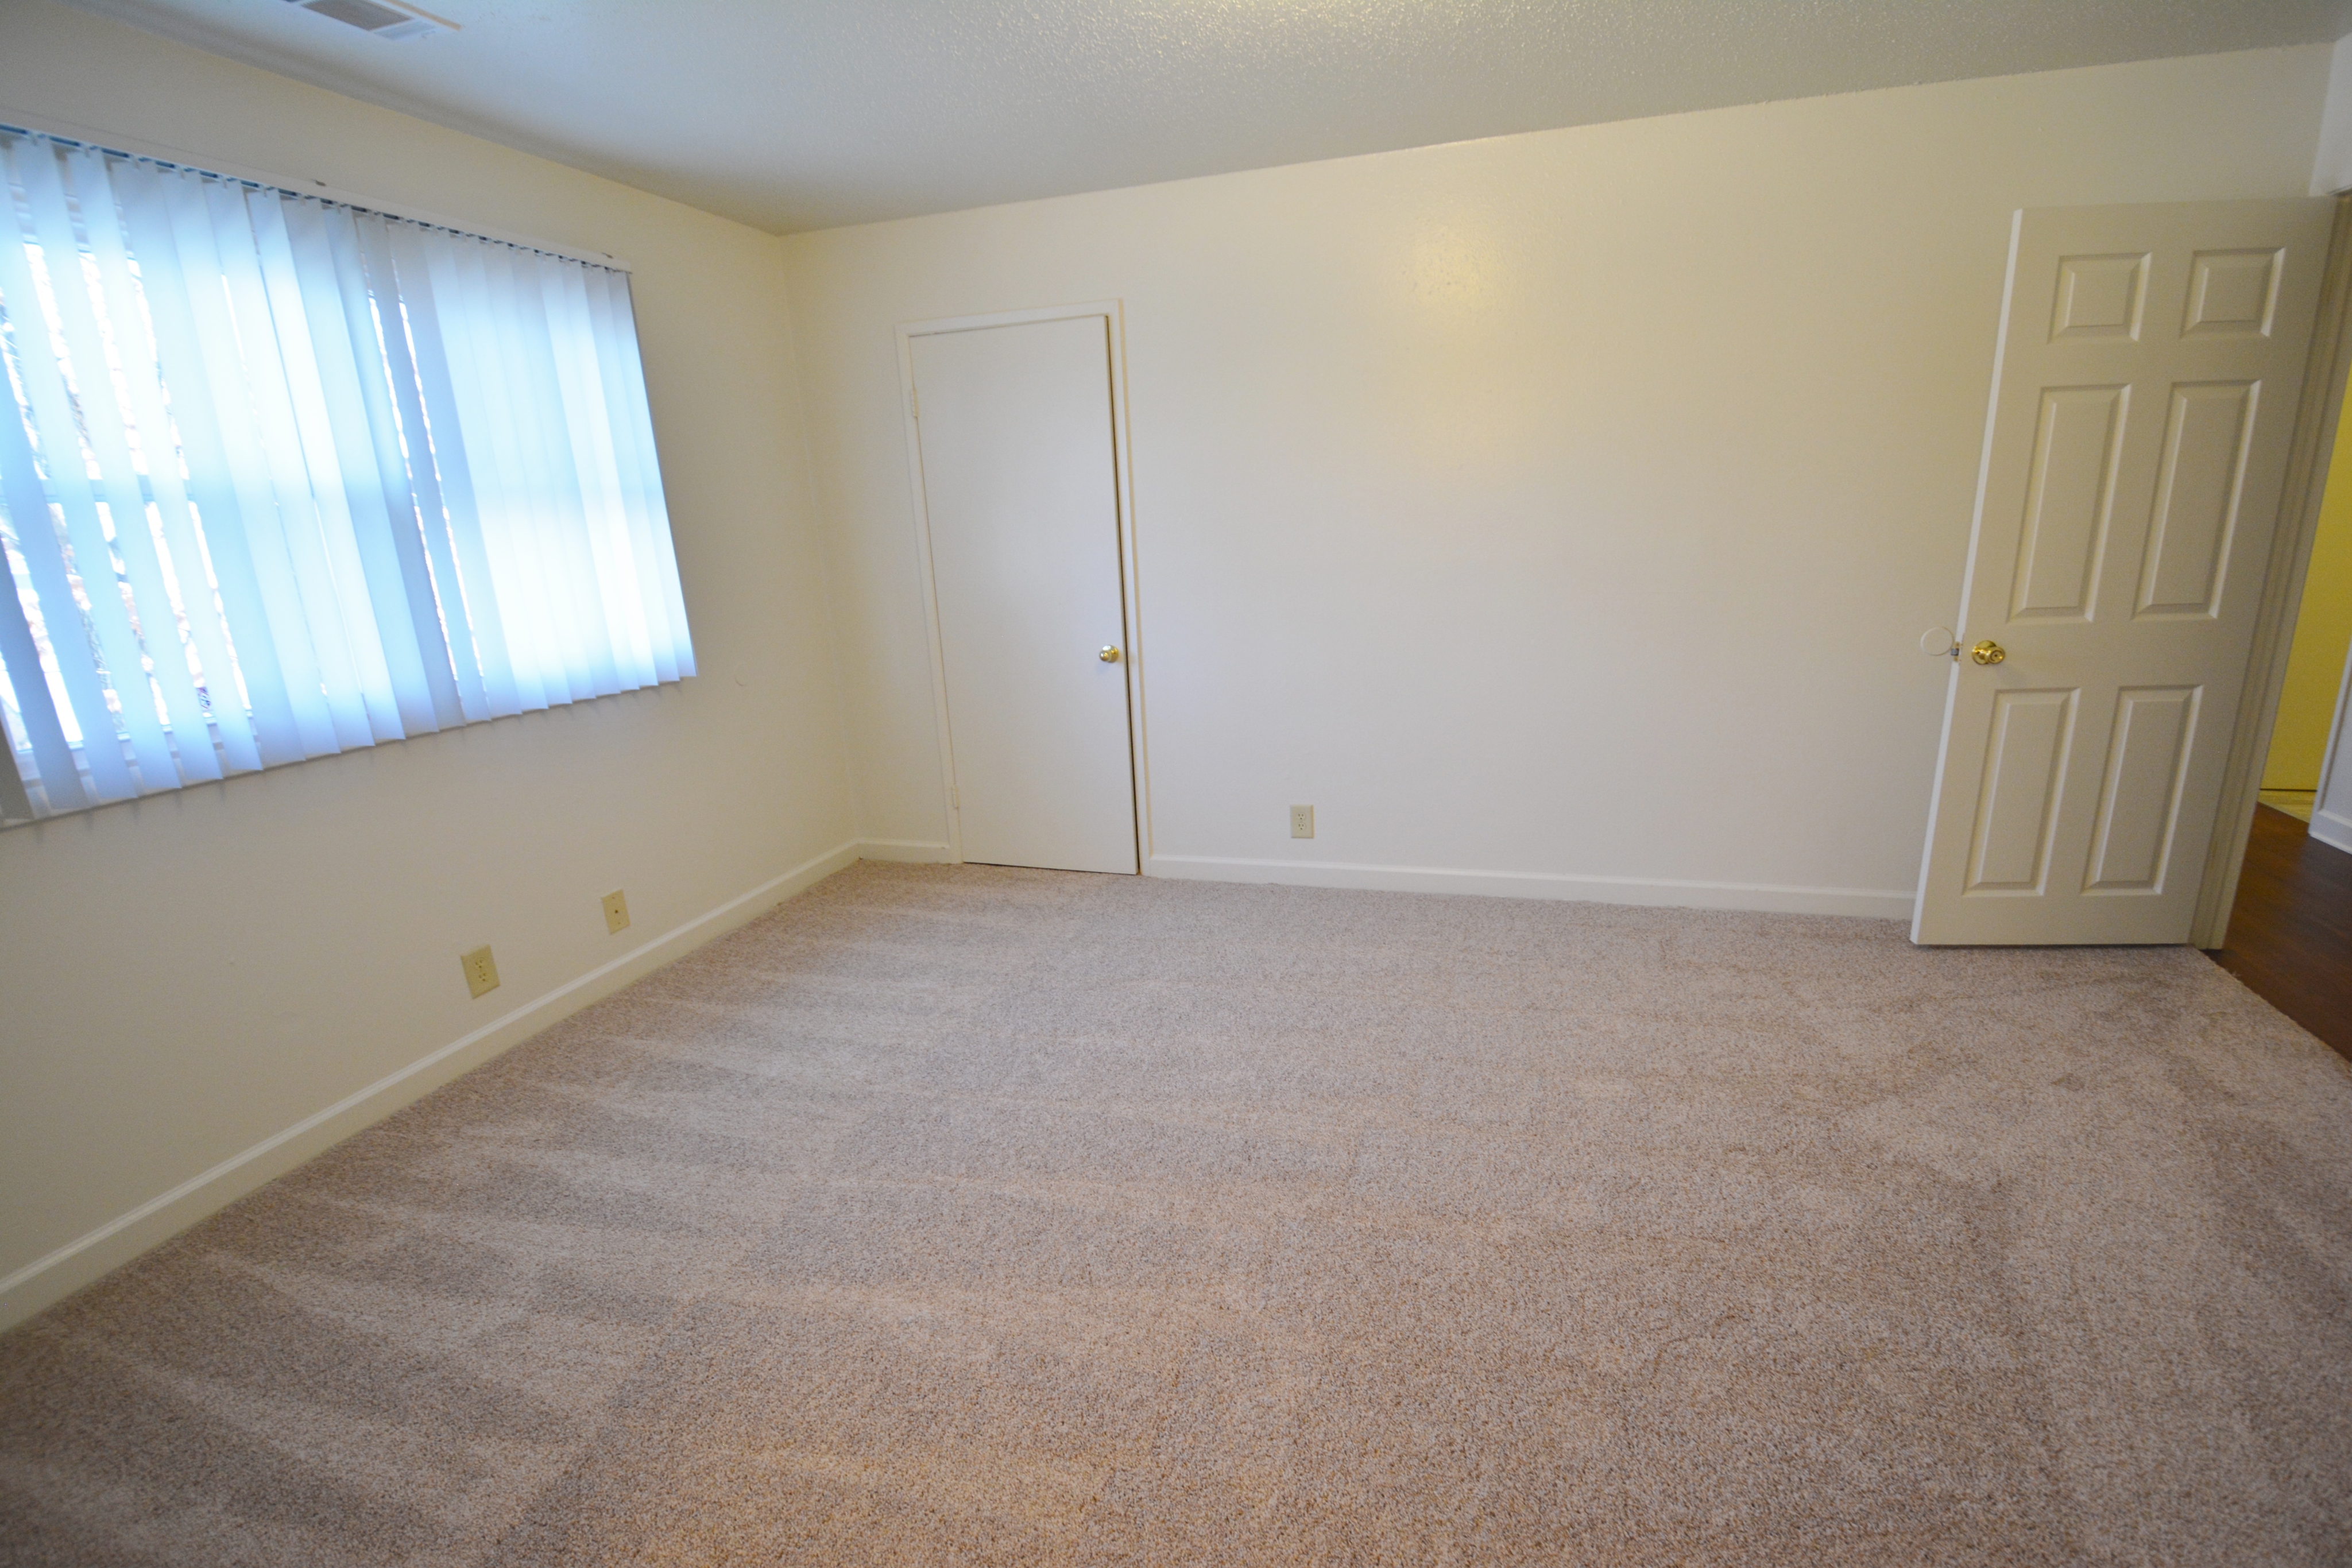 Elegant Bedroom | Fort Campbell KY Apartment For Rent | Campbell Crossing